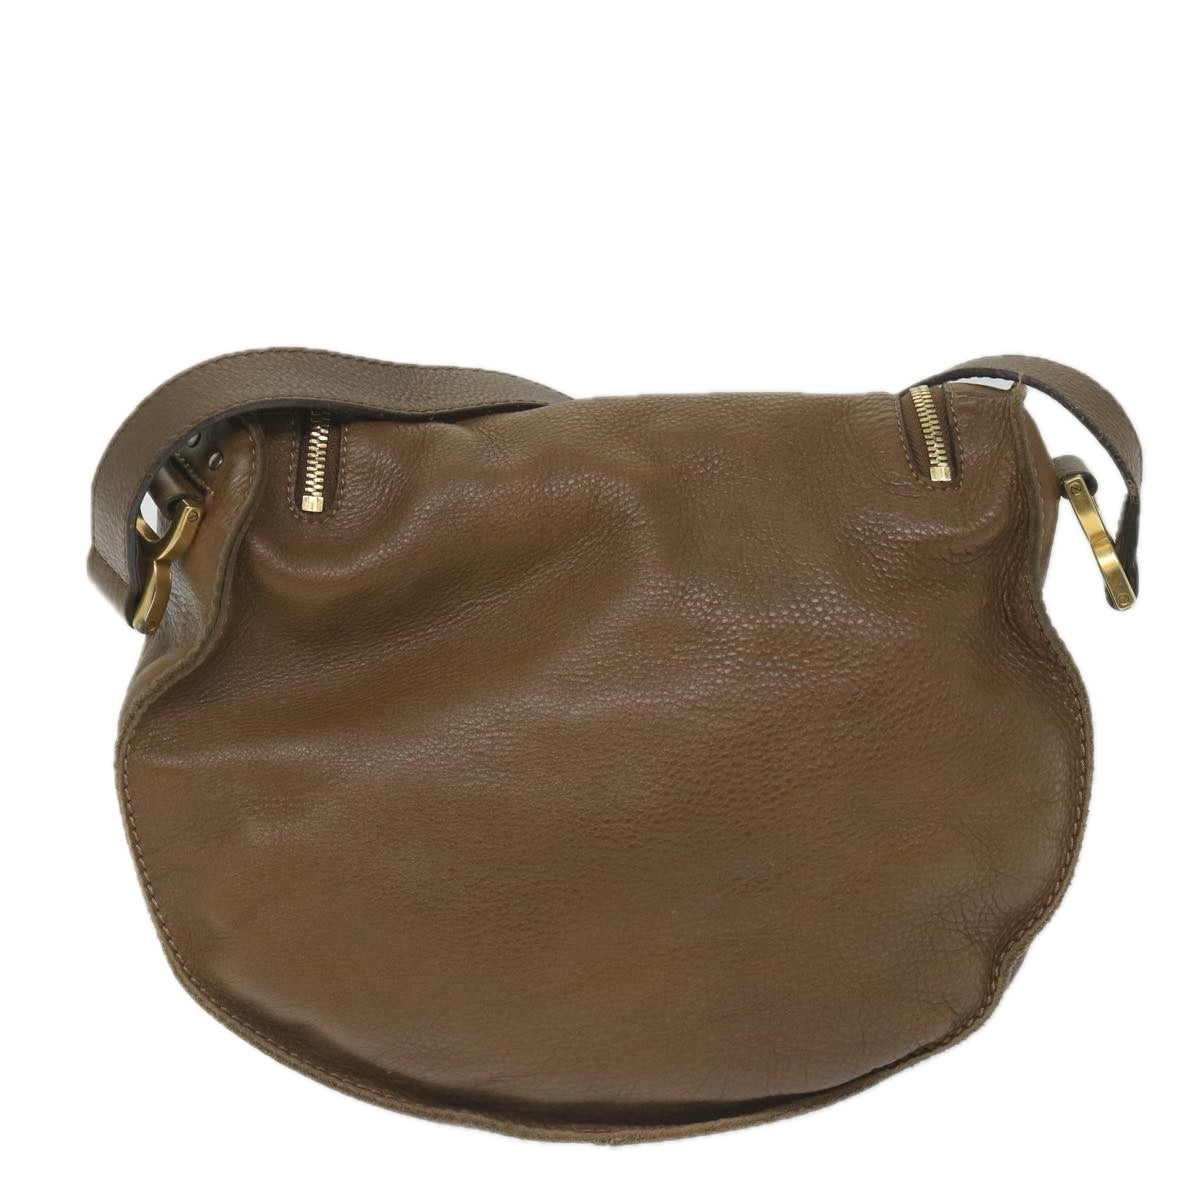 Chloe Mercy Shoulder Bag Leather Brown Auth 58160 - 0